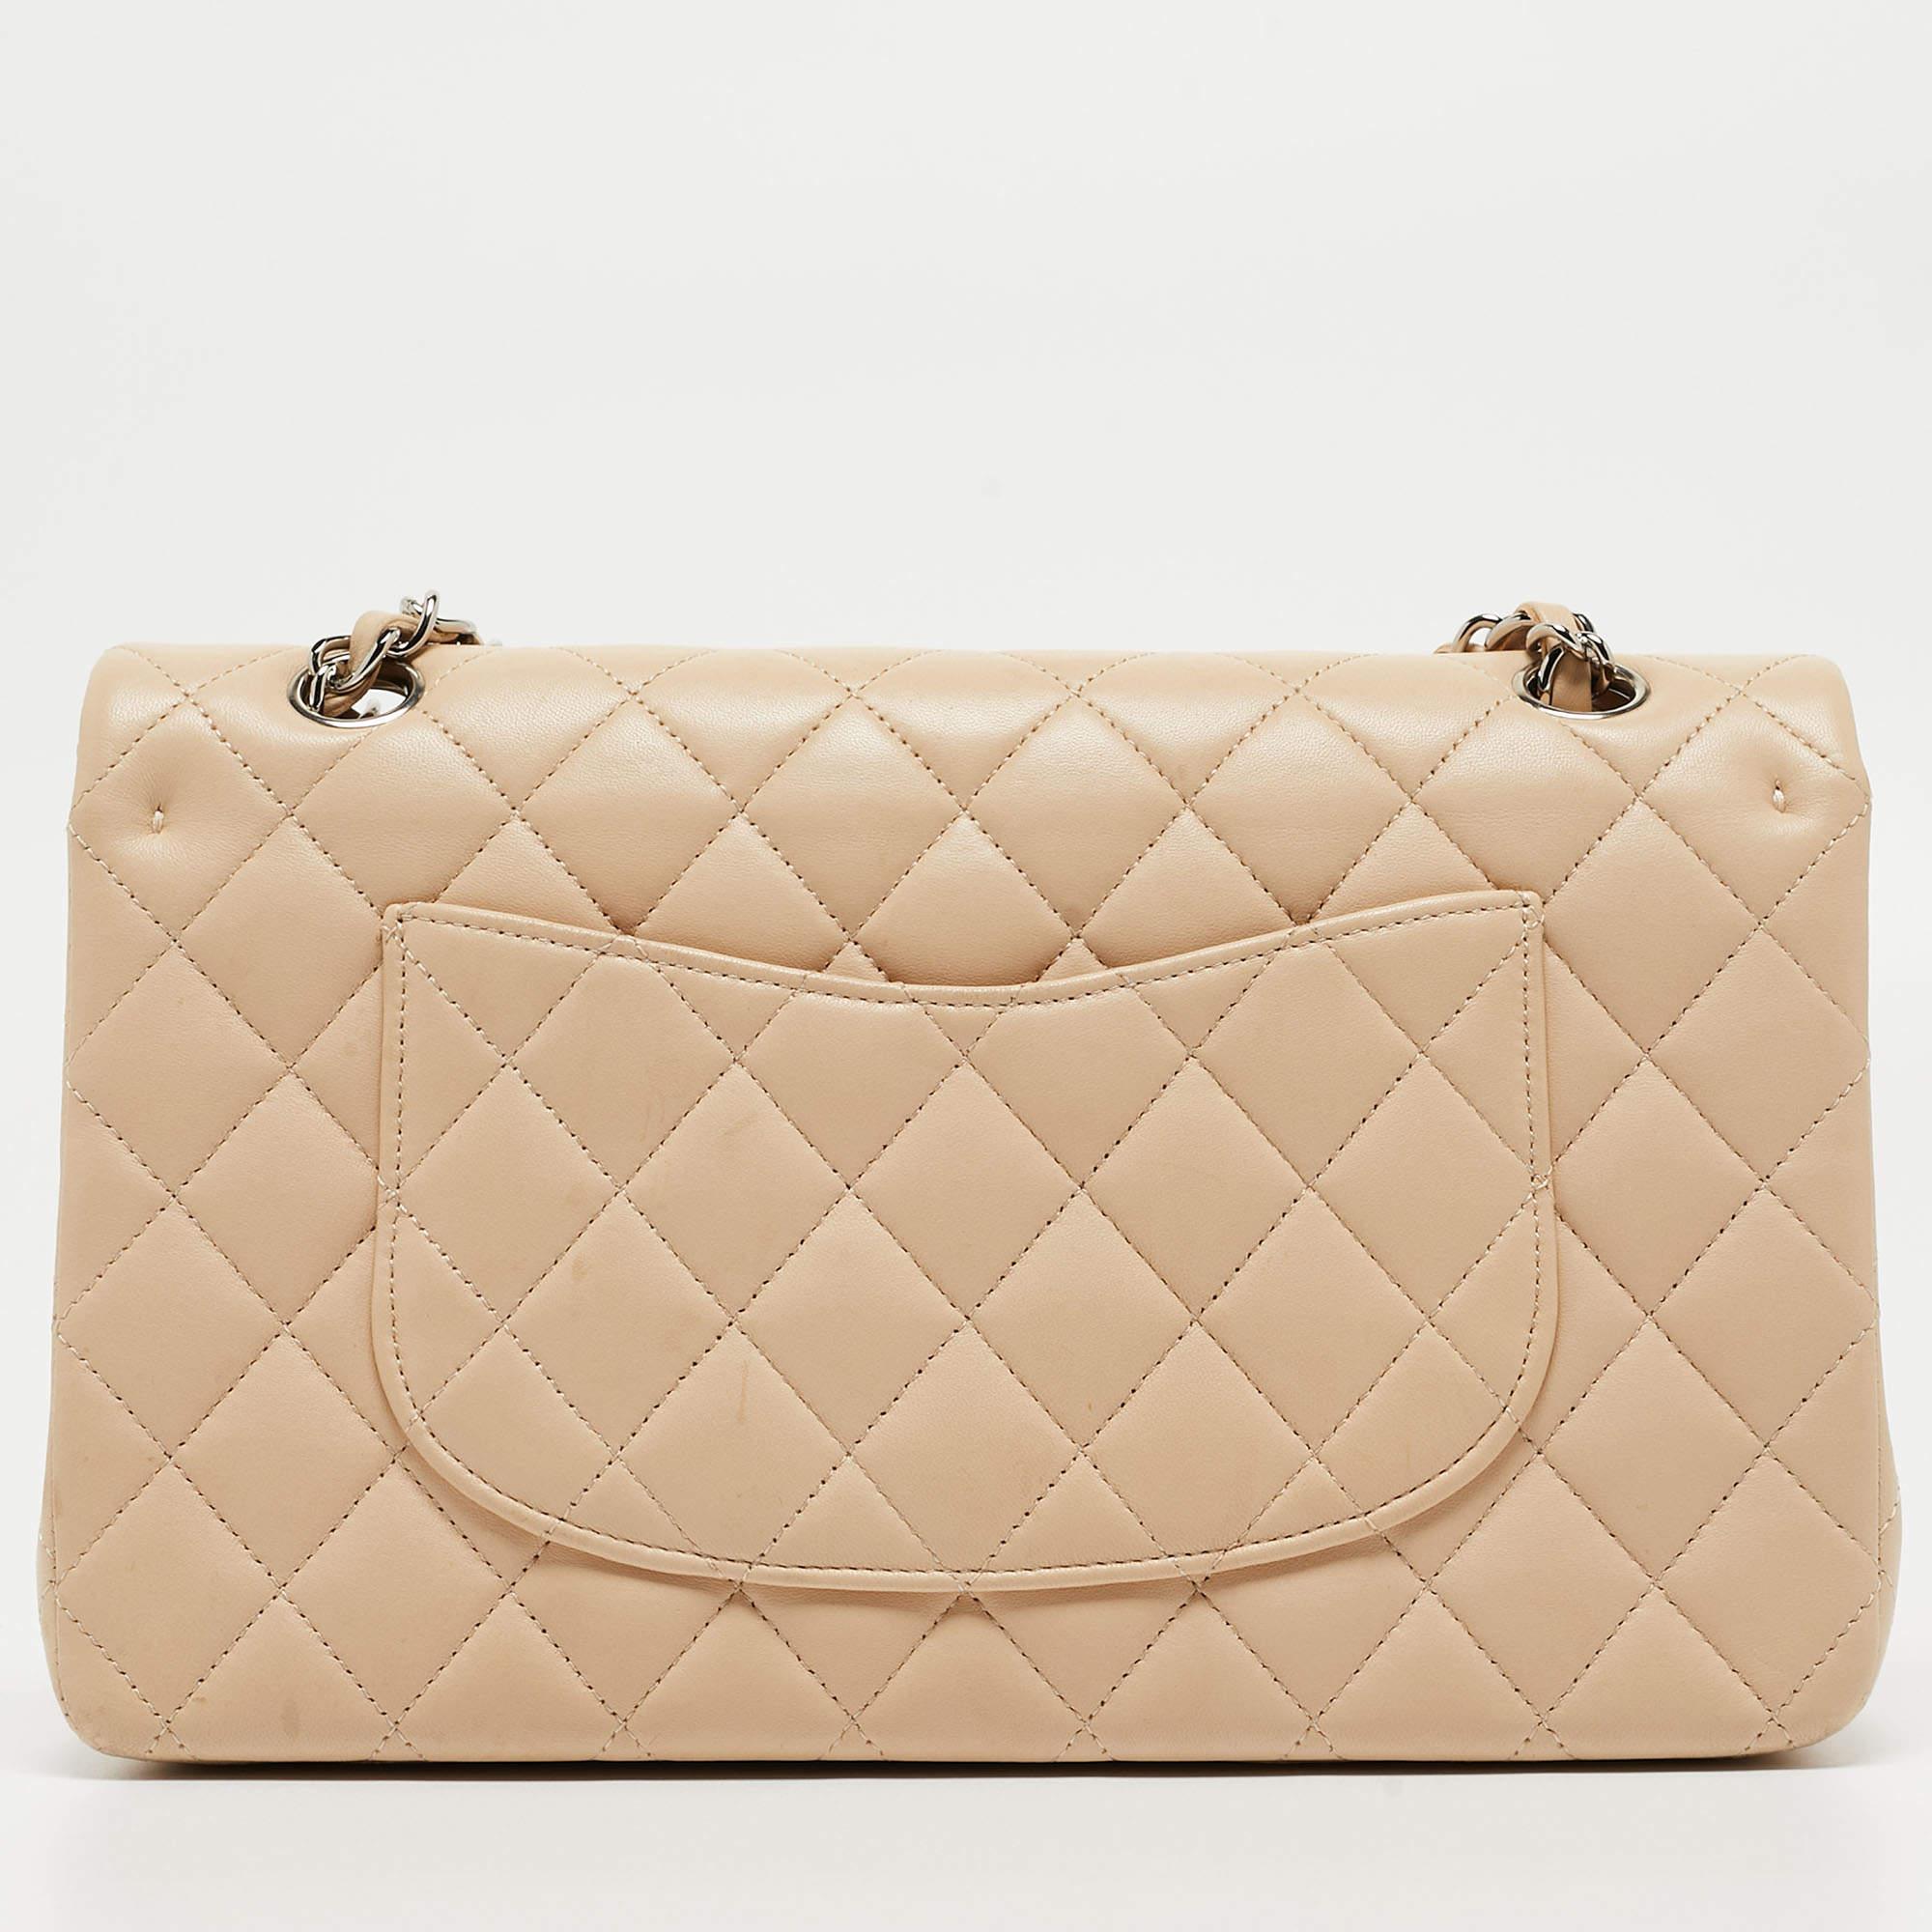 Indulge in timeless luxury with this Chanel Classic Double Flap bag. Meticulously handcrafted, this iconic piece combines heritage, elegance, and craftsmanship, elevating your style to a level of unmatched sophistication.

Includes: Original